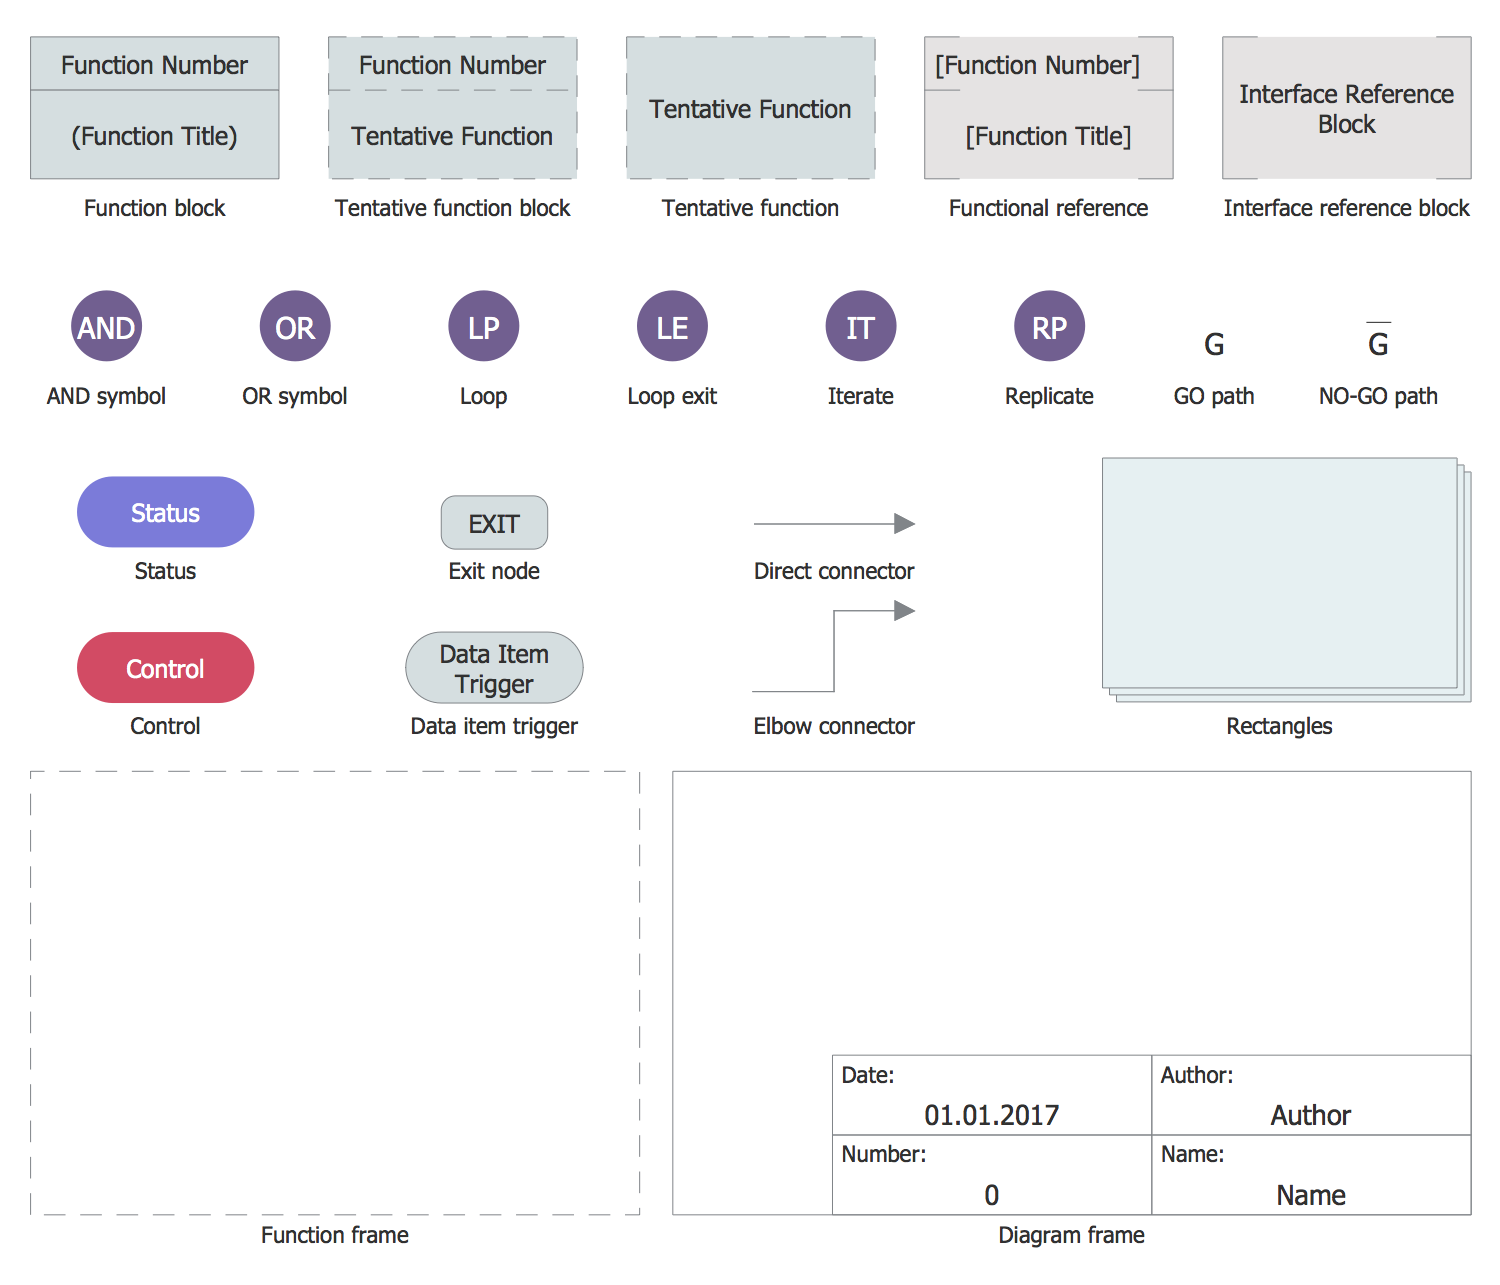 New Business Process Modeling Addition to ConceptDraw Solution Park Image